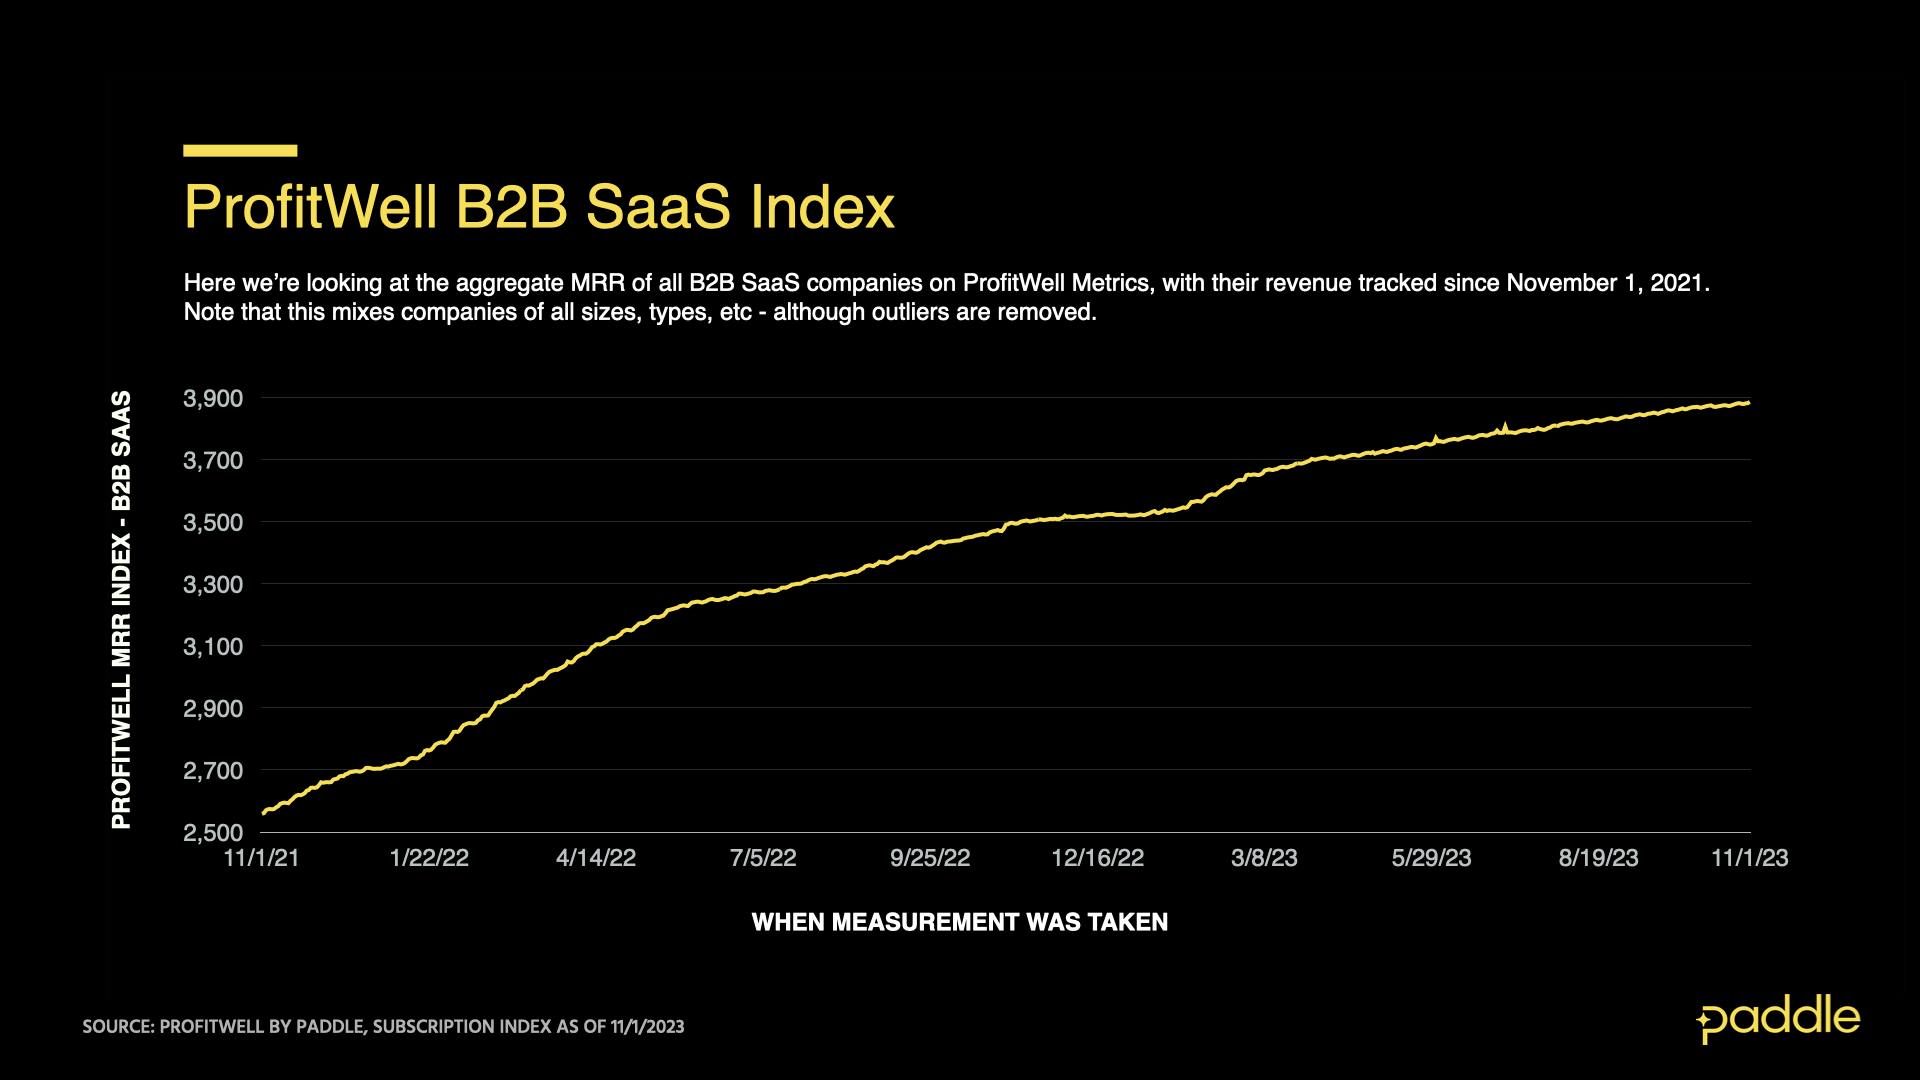 ProfitWell B2B SaaS Index as of November 1, 2023 - Total MRR over time